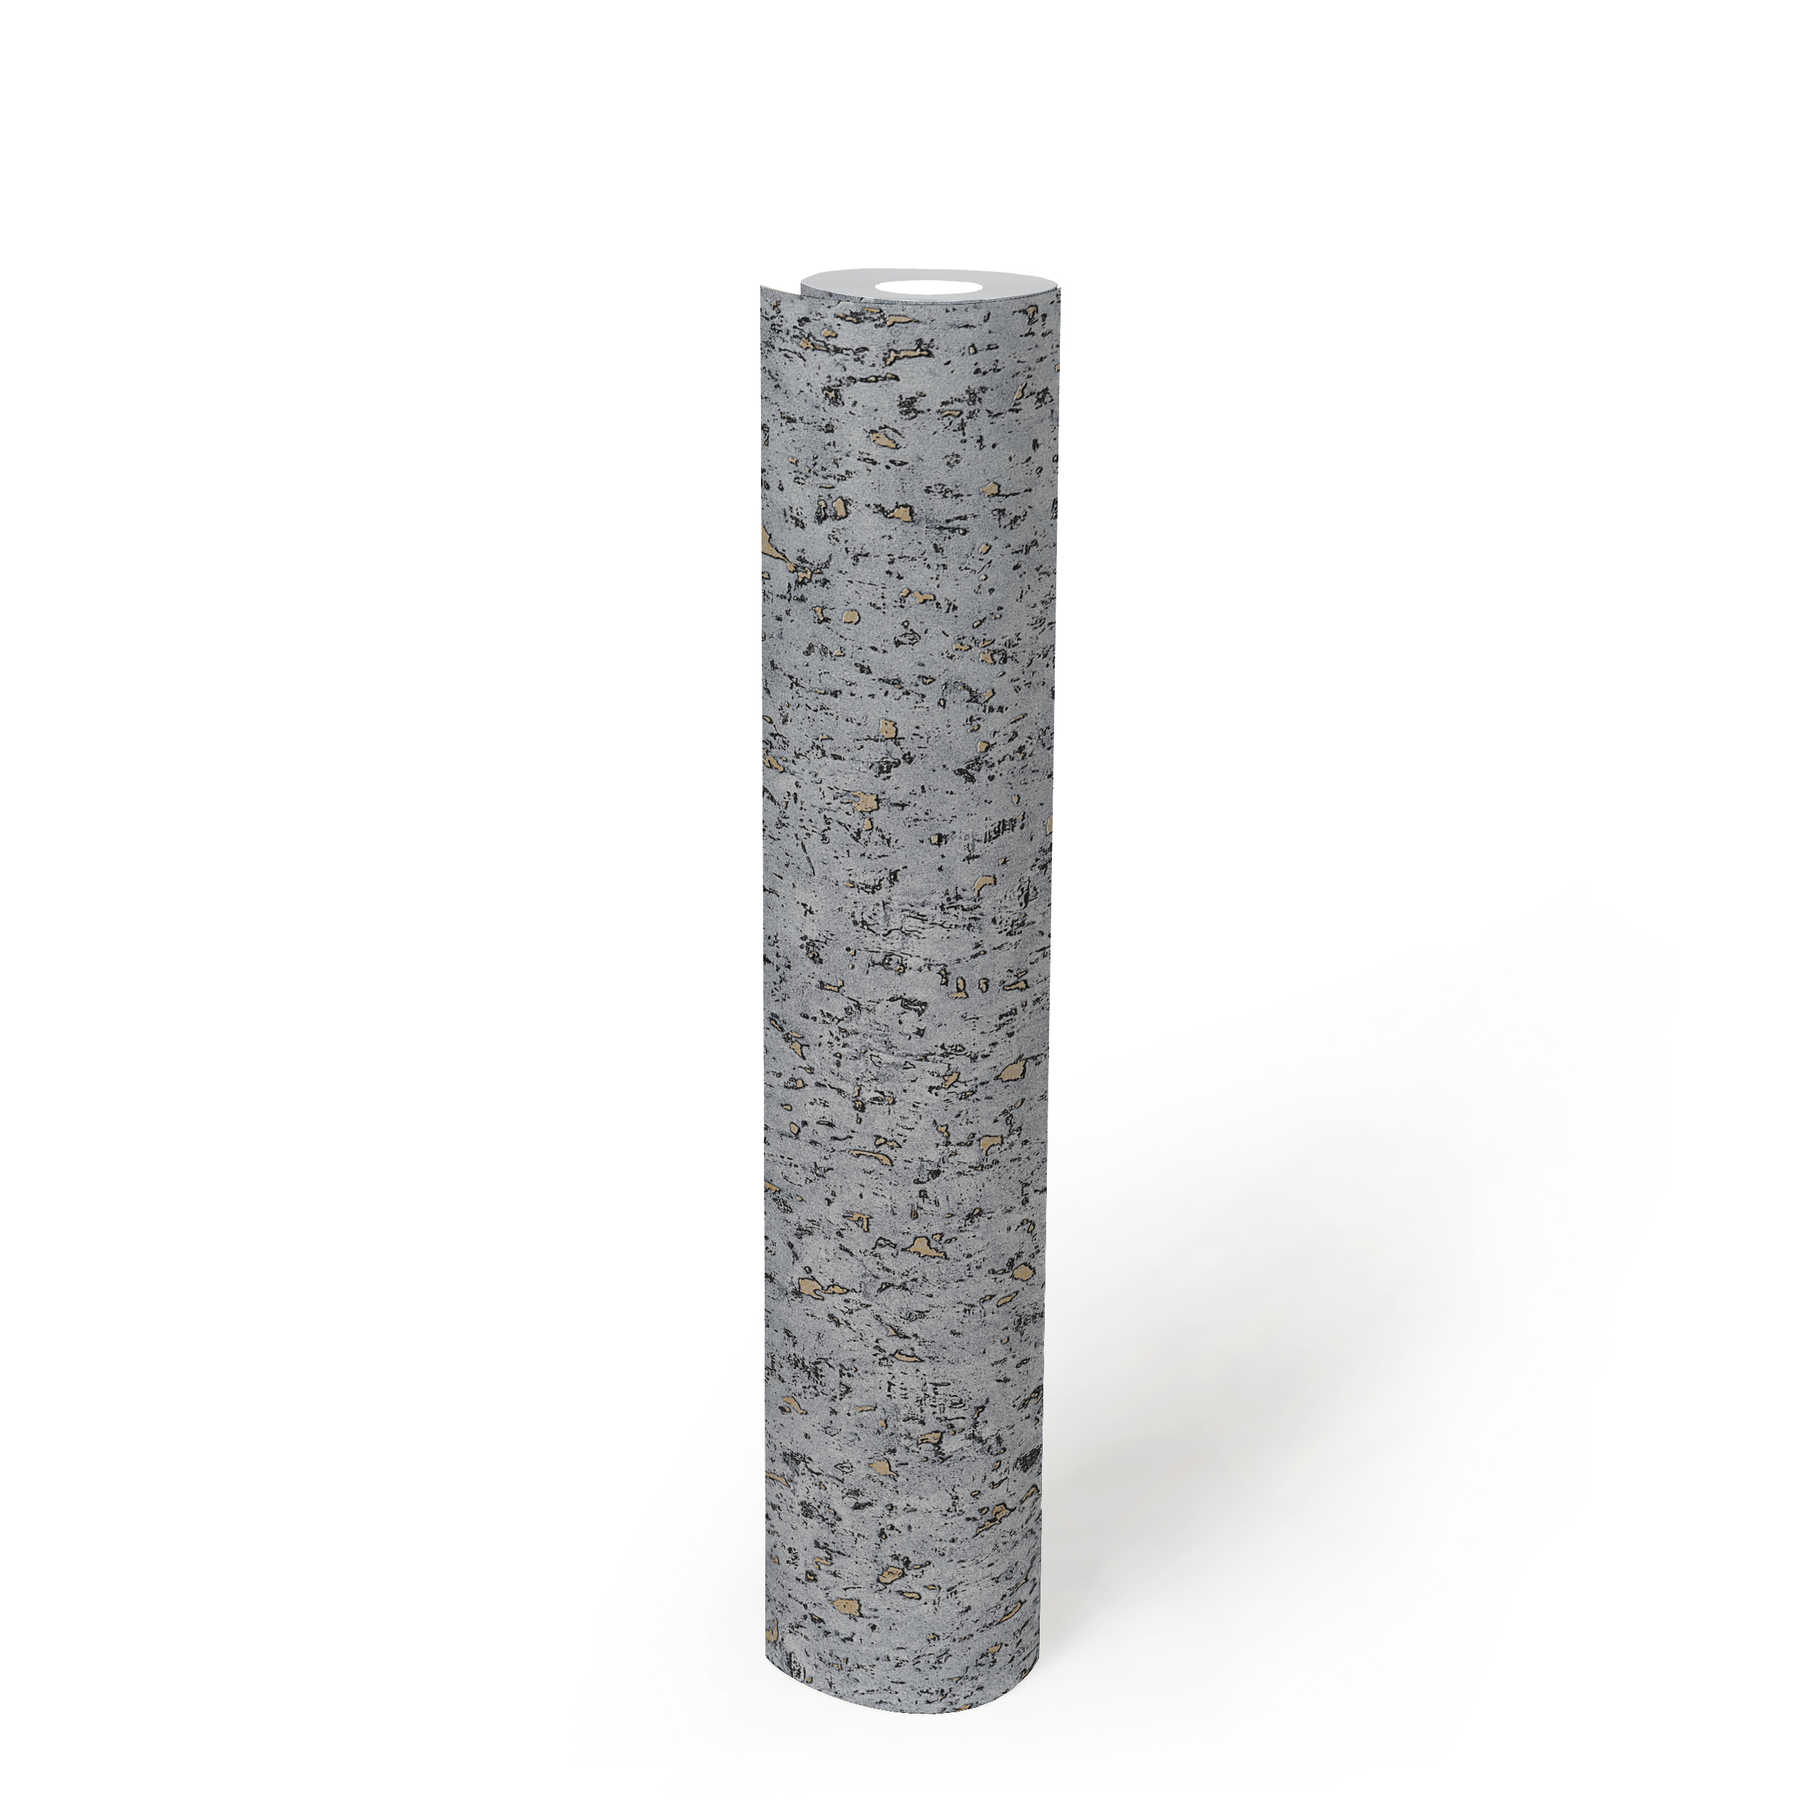             Wallpaper cork structure with metallic accent - grey, gold, black
        